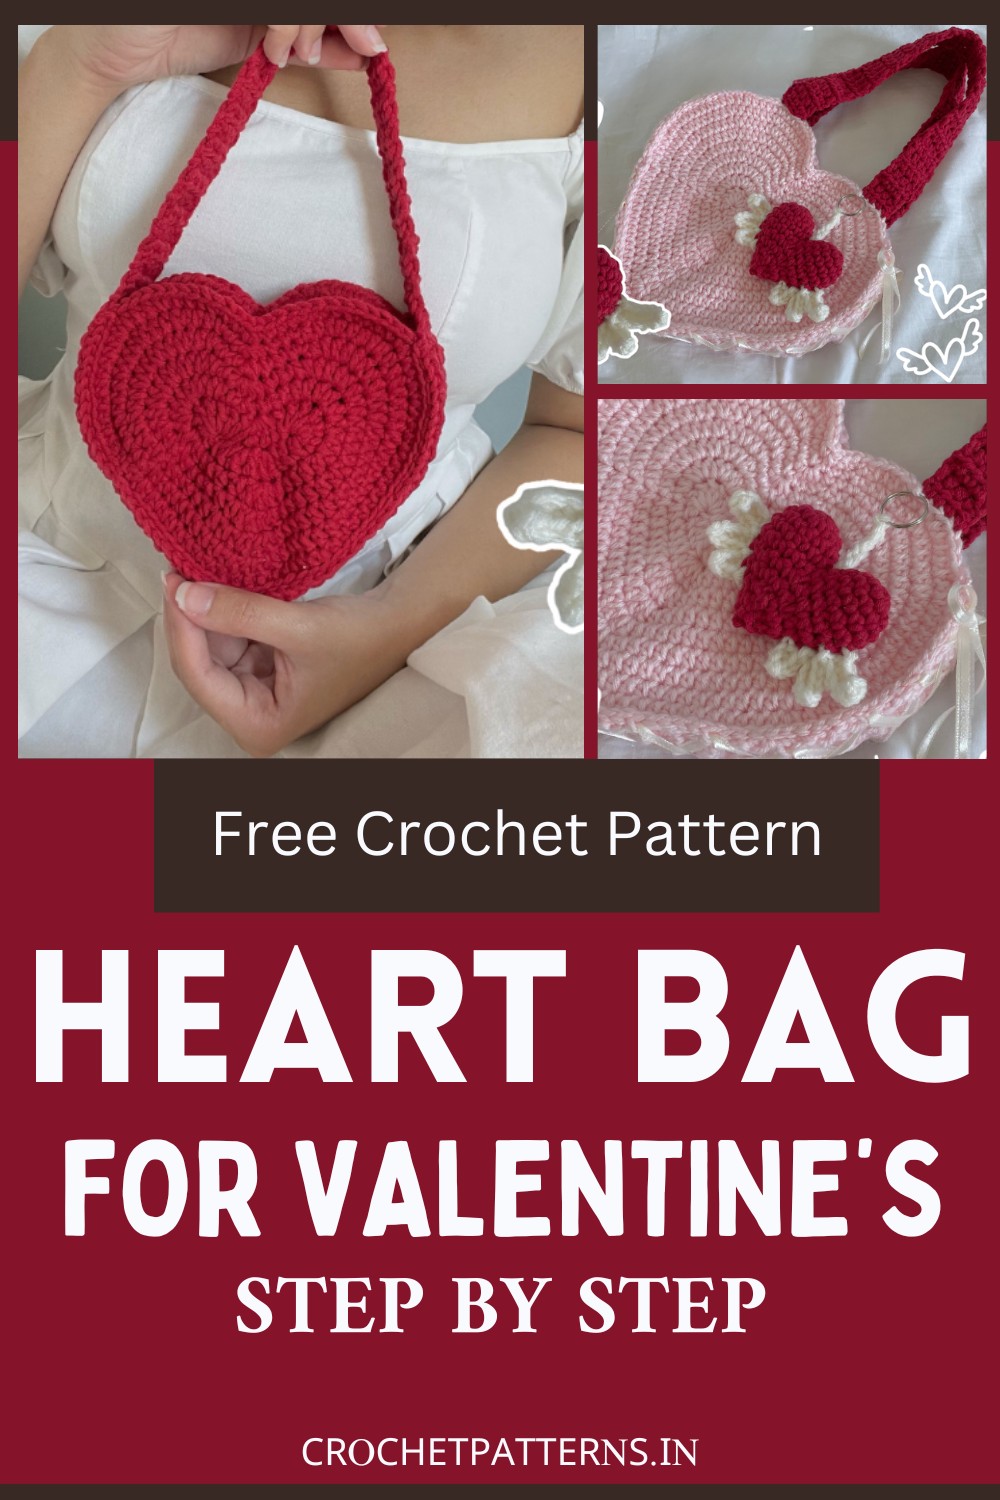 Crochet Heart Bag Pattern For Valentine’s Day Crafting